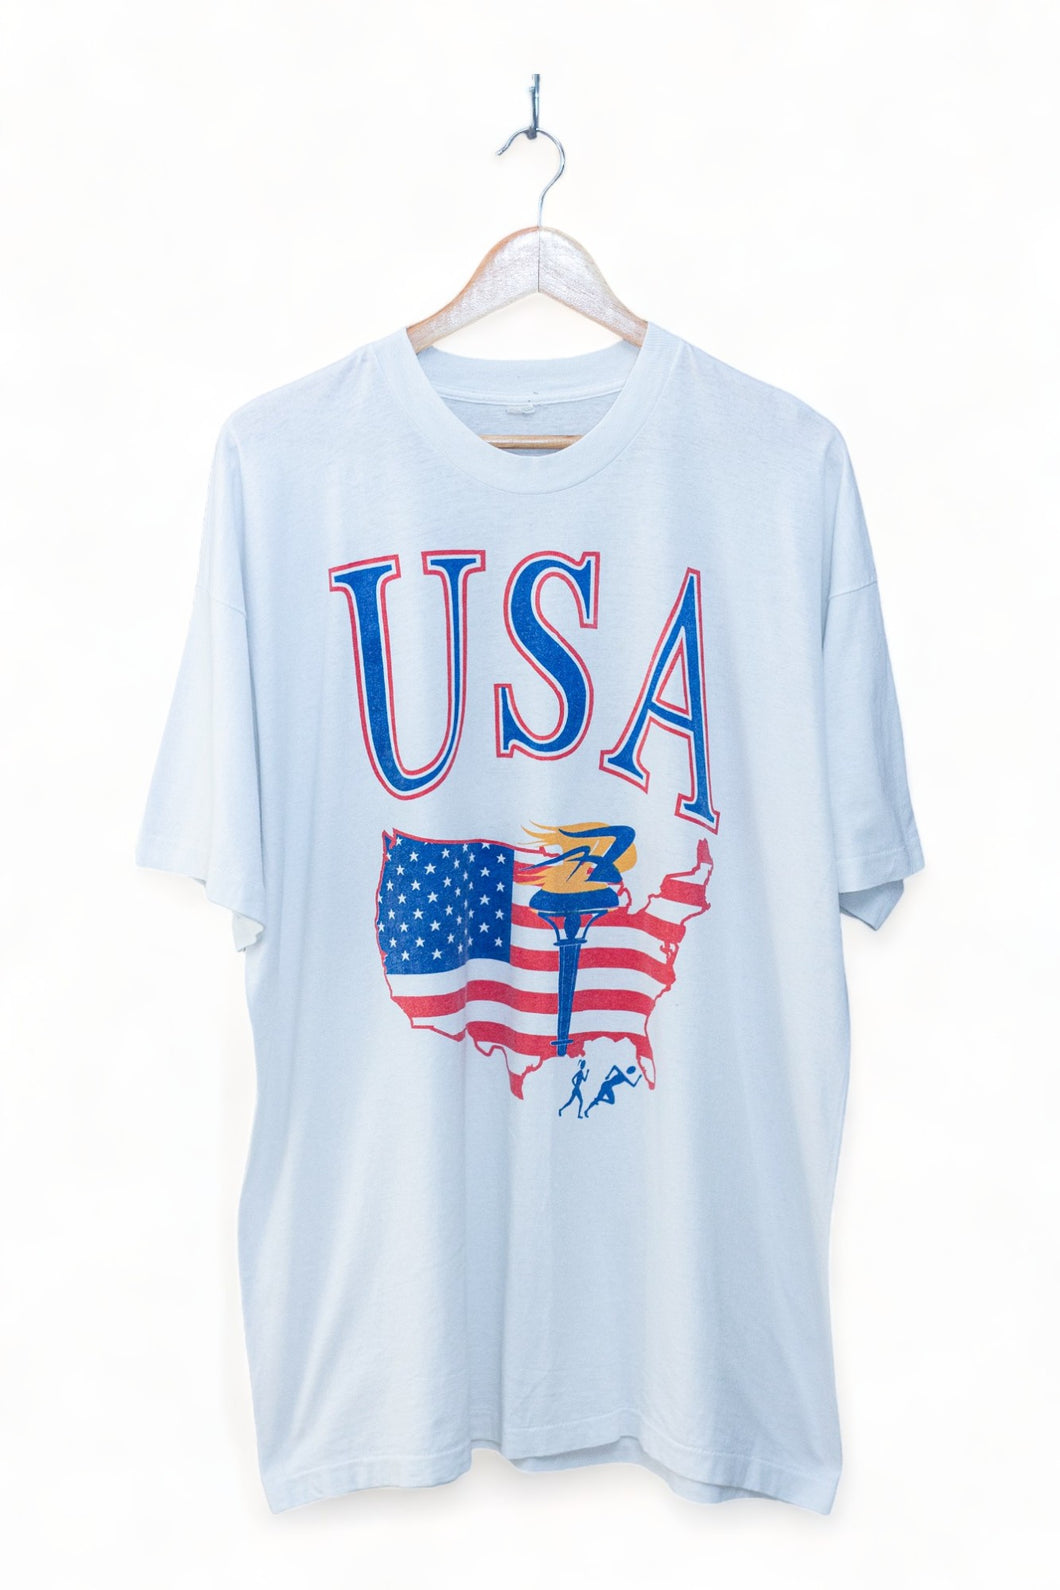 USA Road To Atlanta 1996 Games Double Sided T-Shirt (XXL)